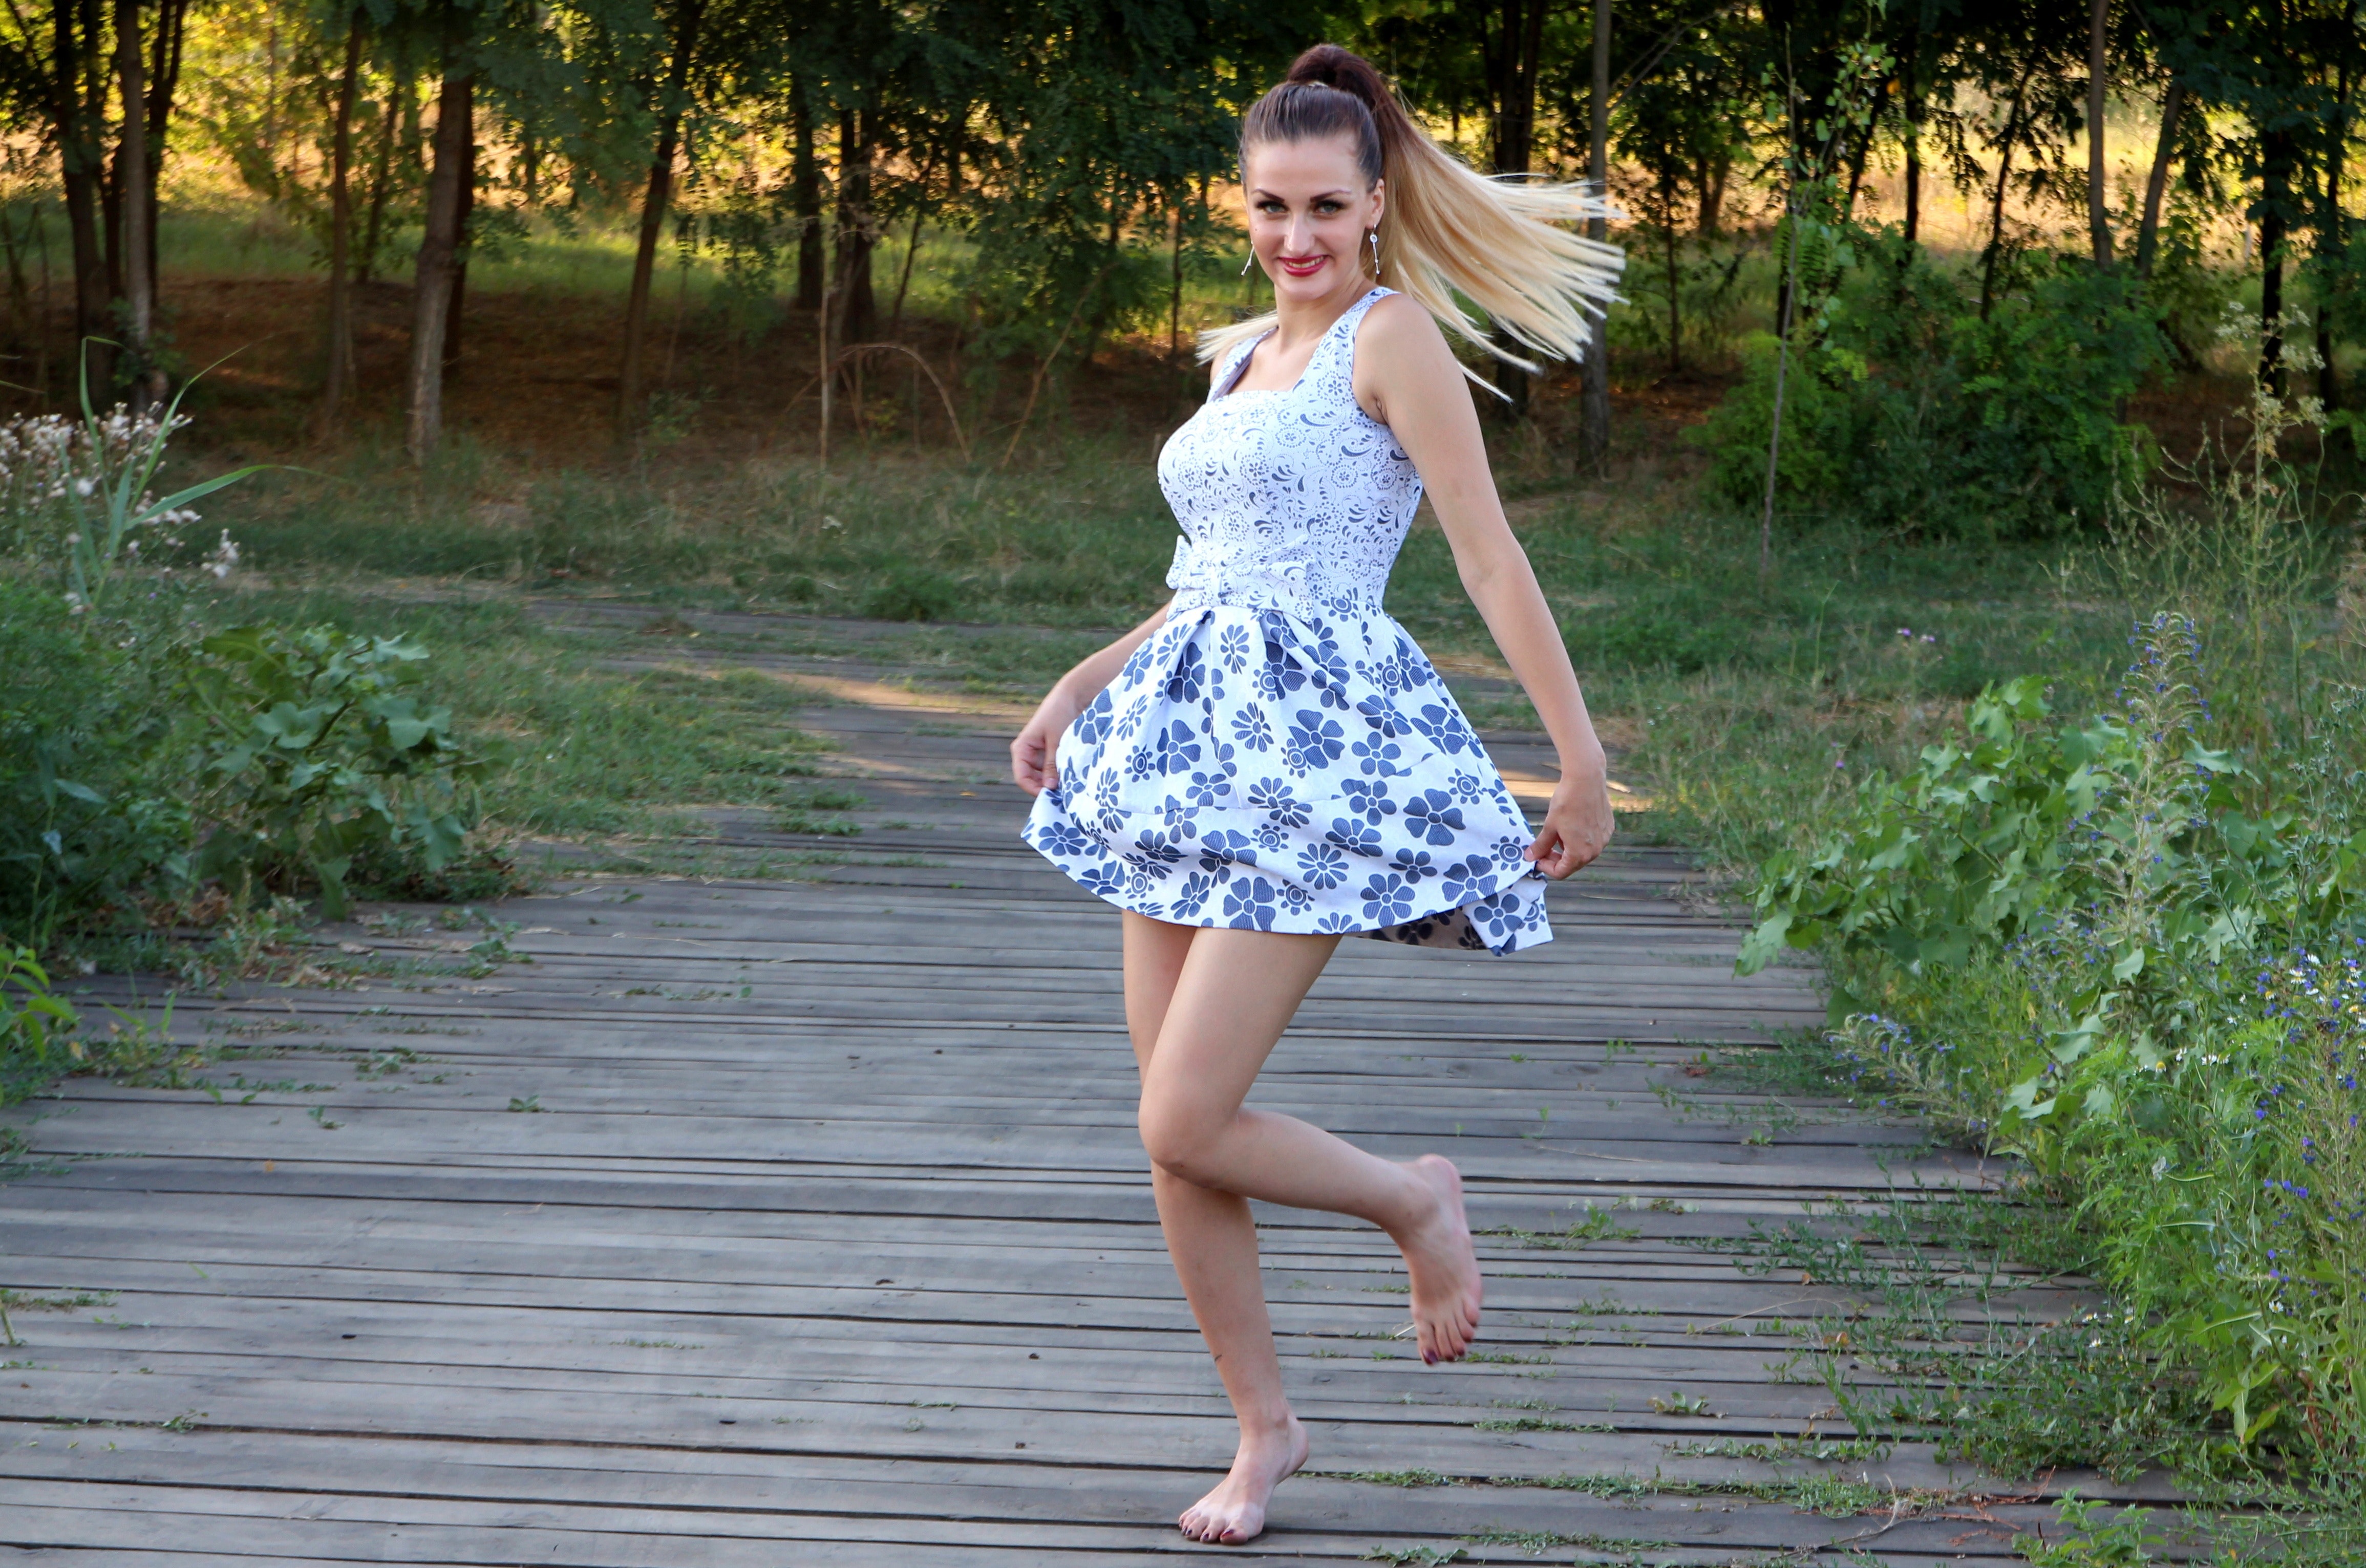 Woman in blue and white skated dress photo